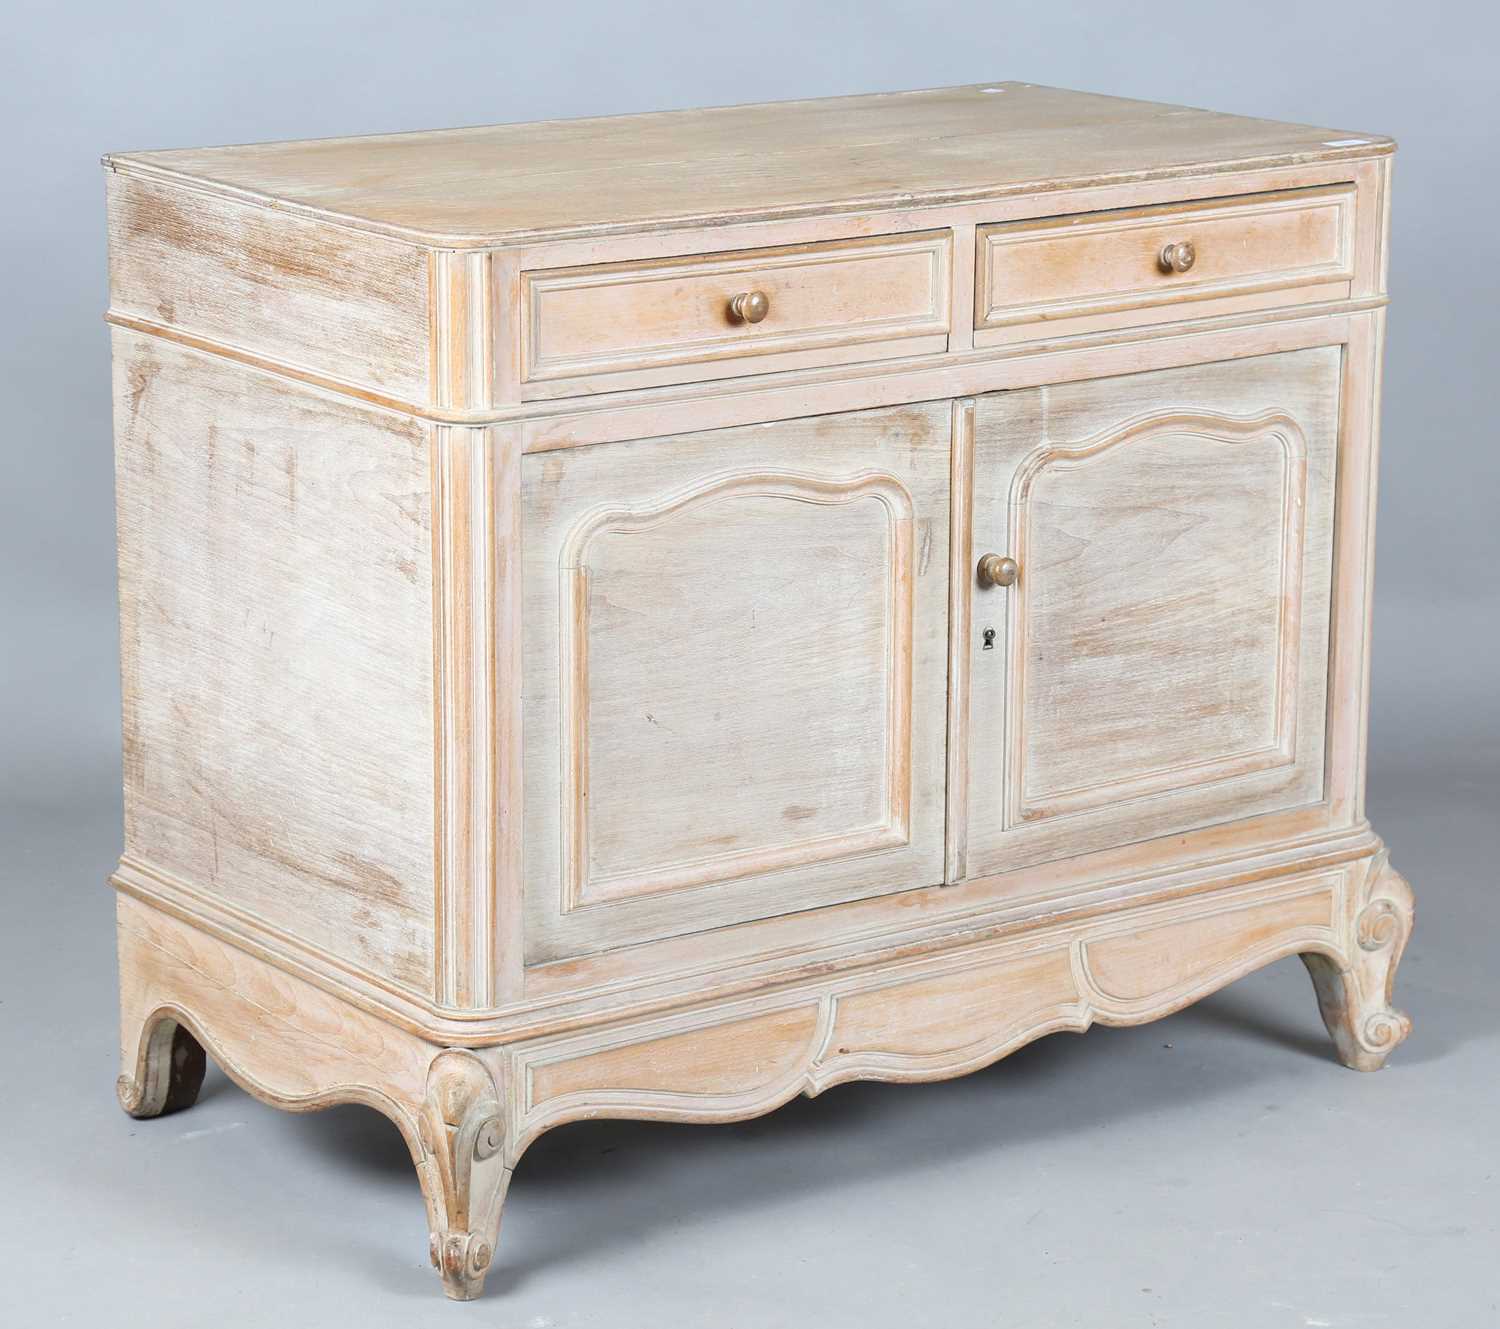 An early 20th century French limed oak side cabinet by Cauvet Frères, Paris, bearing maker's